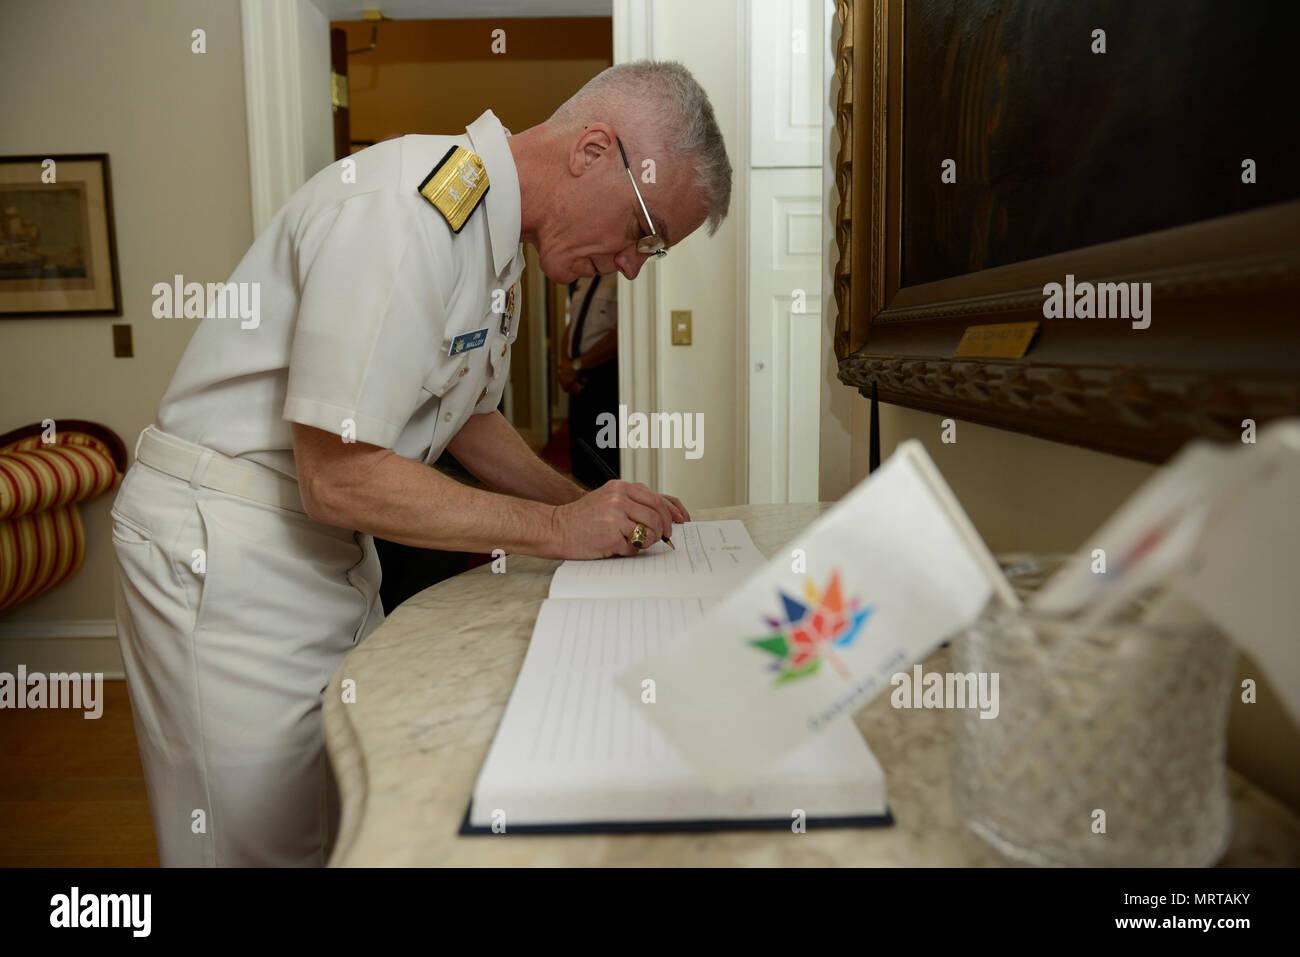 170629-N-YZ751-070   HALIFAX, Nova Scotia (June 29, 2017) Rear Adm. Jim Malloy, commander of Carrier Strike Group (CSG) 10, signs a guest book before meeting with Nova Scotia Lieutenant-Governor Arthur LeBlanc. Malloy is meeting senior leadership in Halifax, Nova Scotia, as part of the Canada 150 anniversary celebration with the aircraft carrier USS Dwight D. Eisenhower (CVN 69)(Ike) port visit. (U.S. Navy photo by Mass Communication Specialist 1st Class Tony D. Curtis) Stock Photo